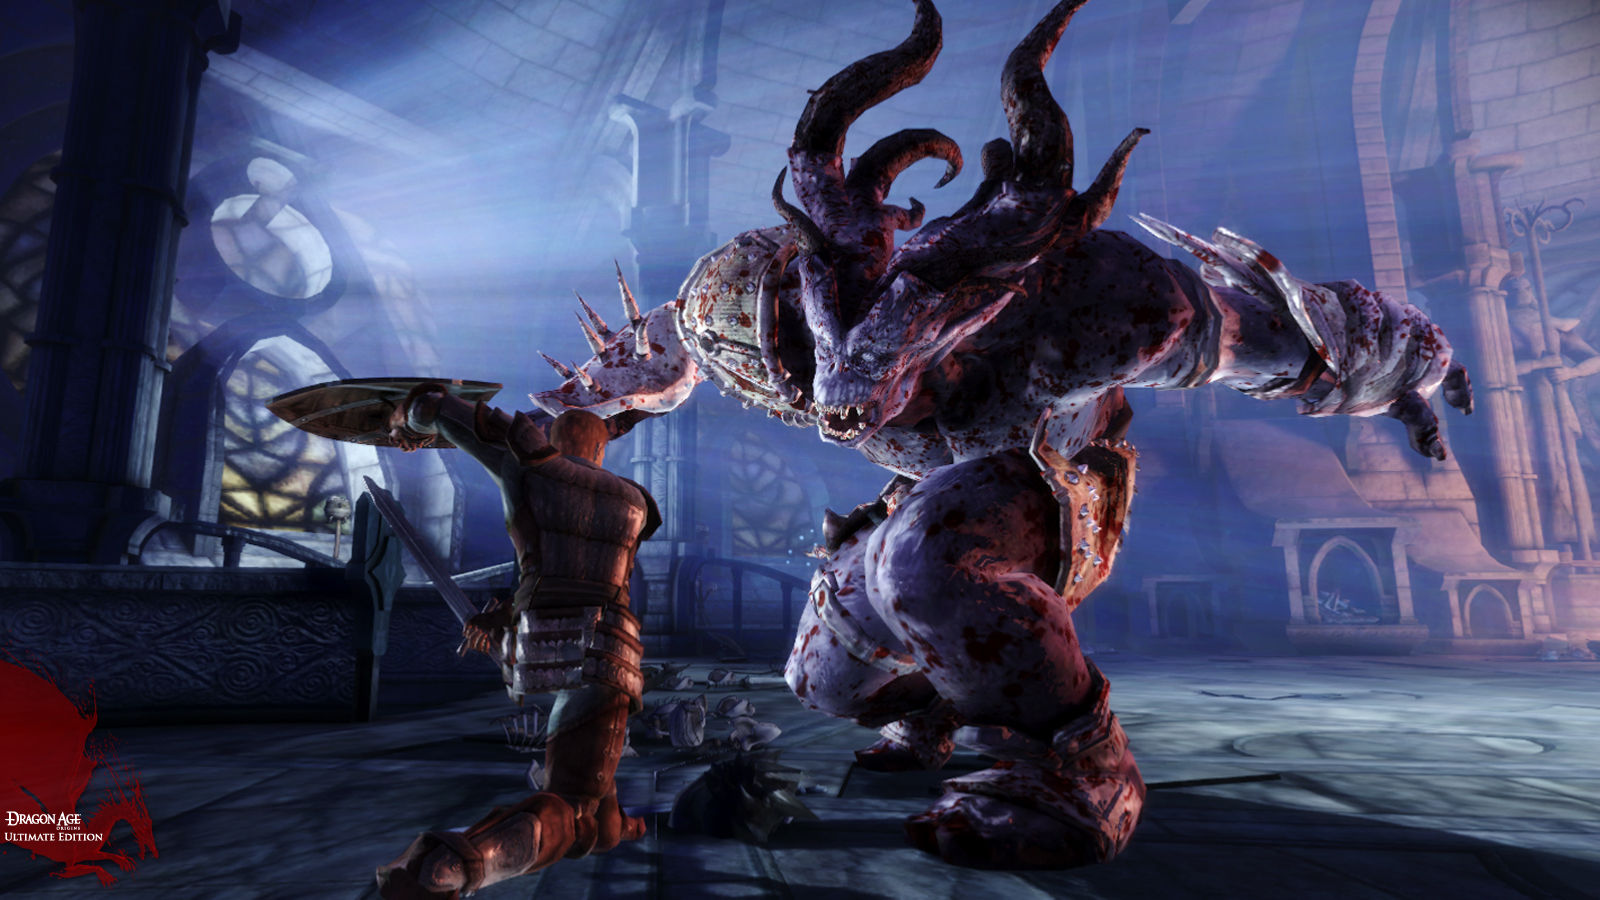 Save 90% on Dragon Age: Origins - Ultimate Edition on Steam